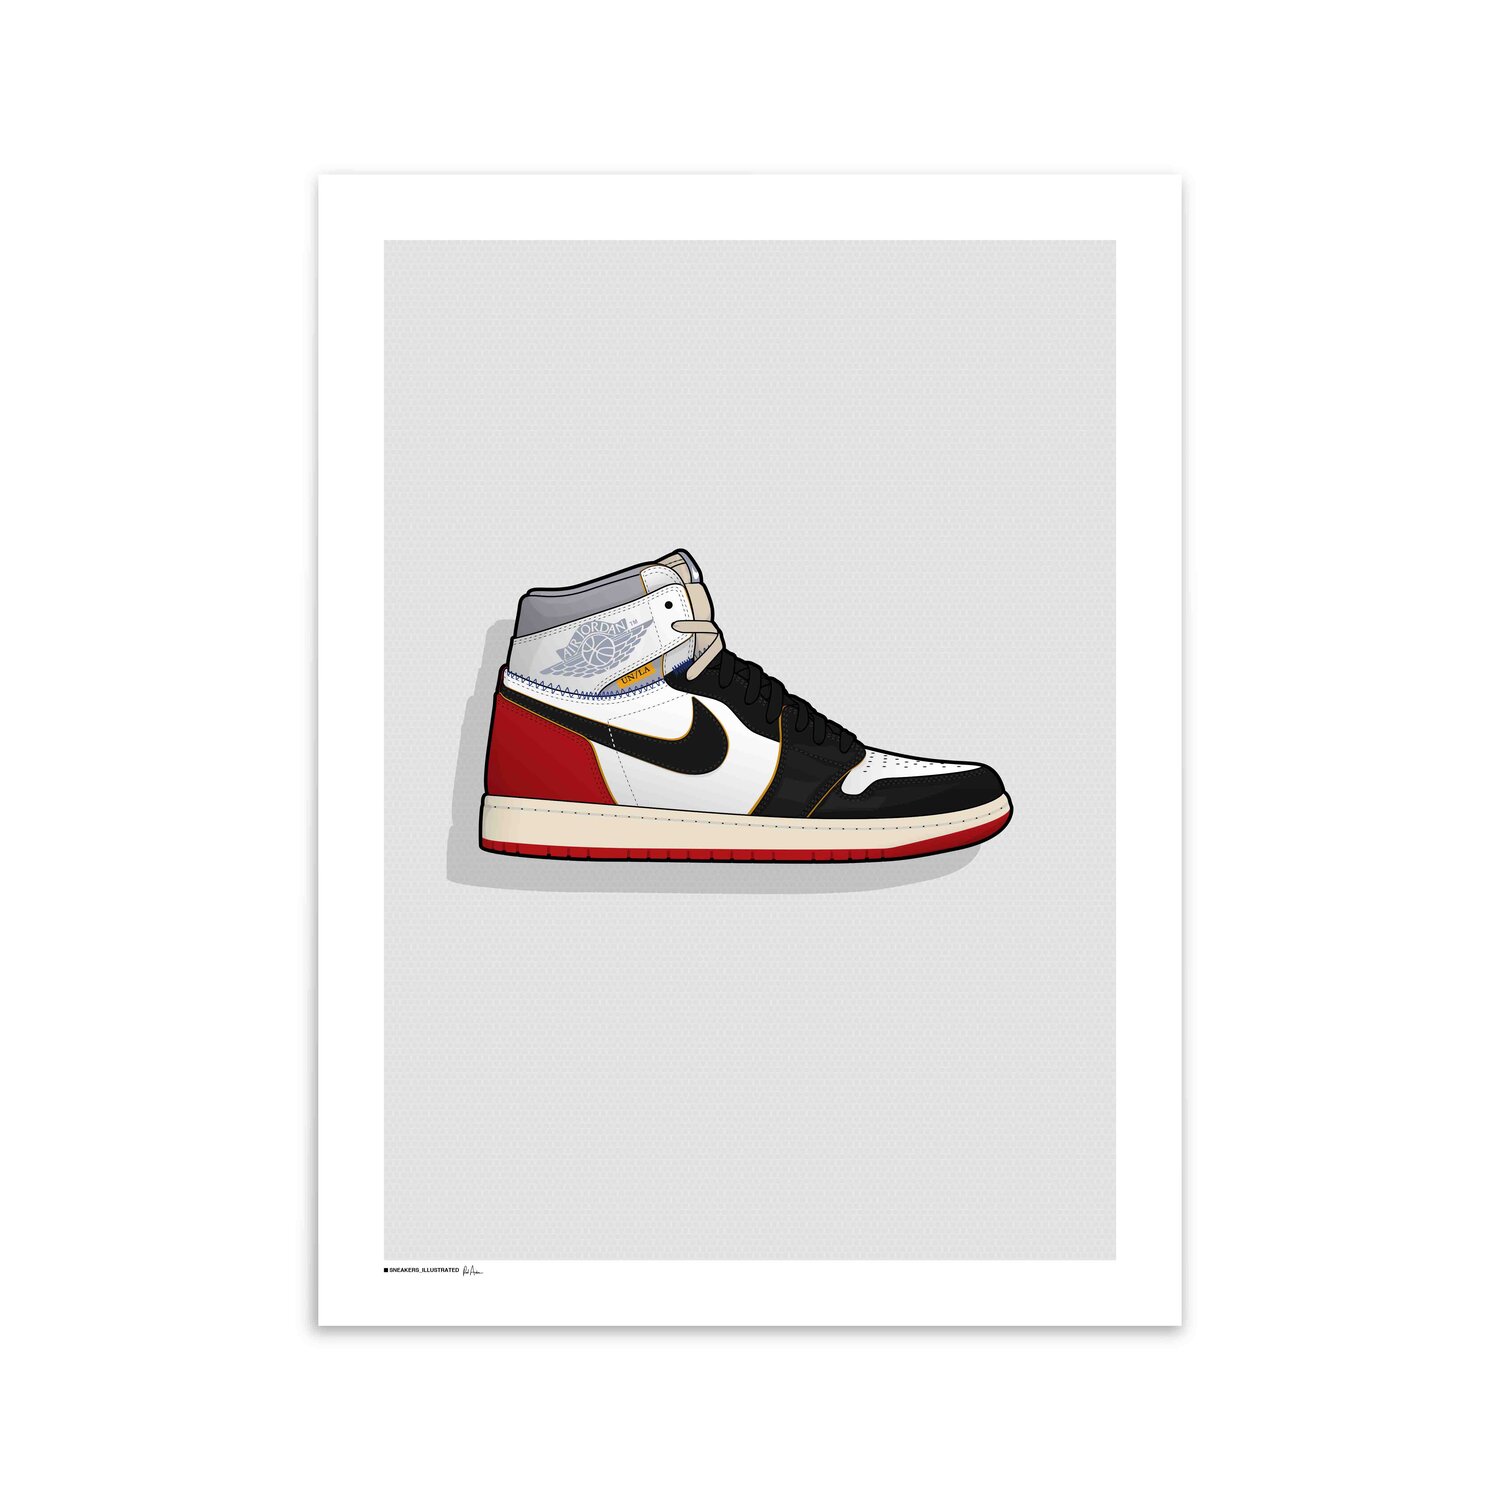 I need Borrow Effectively Air Jordan 1 'Union Black Toe' Poster — Sneakers Illustrated